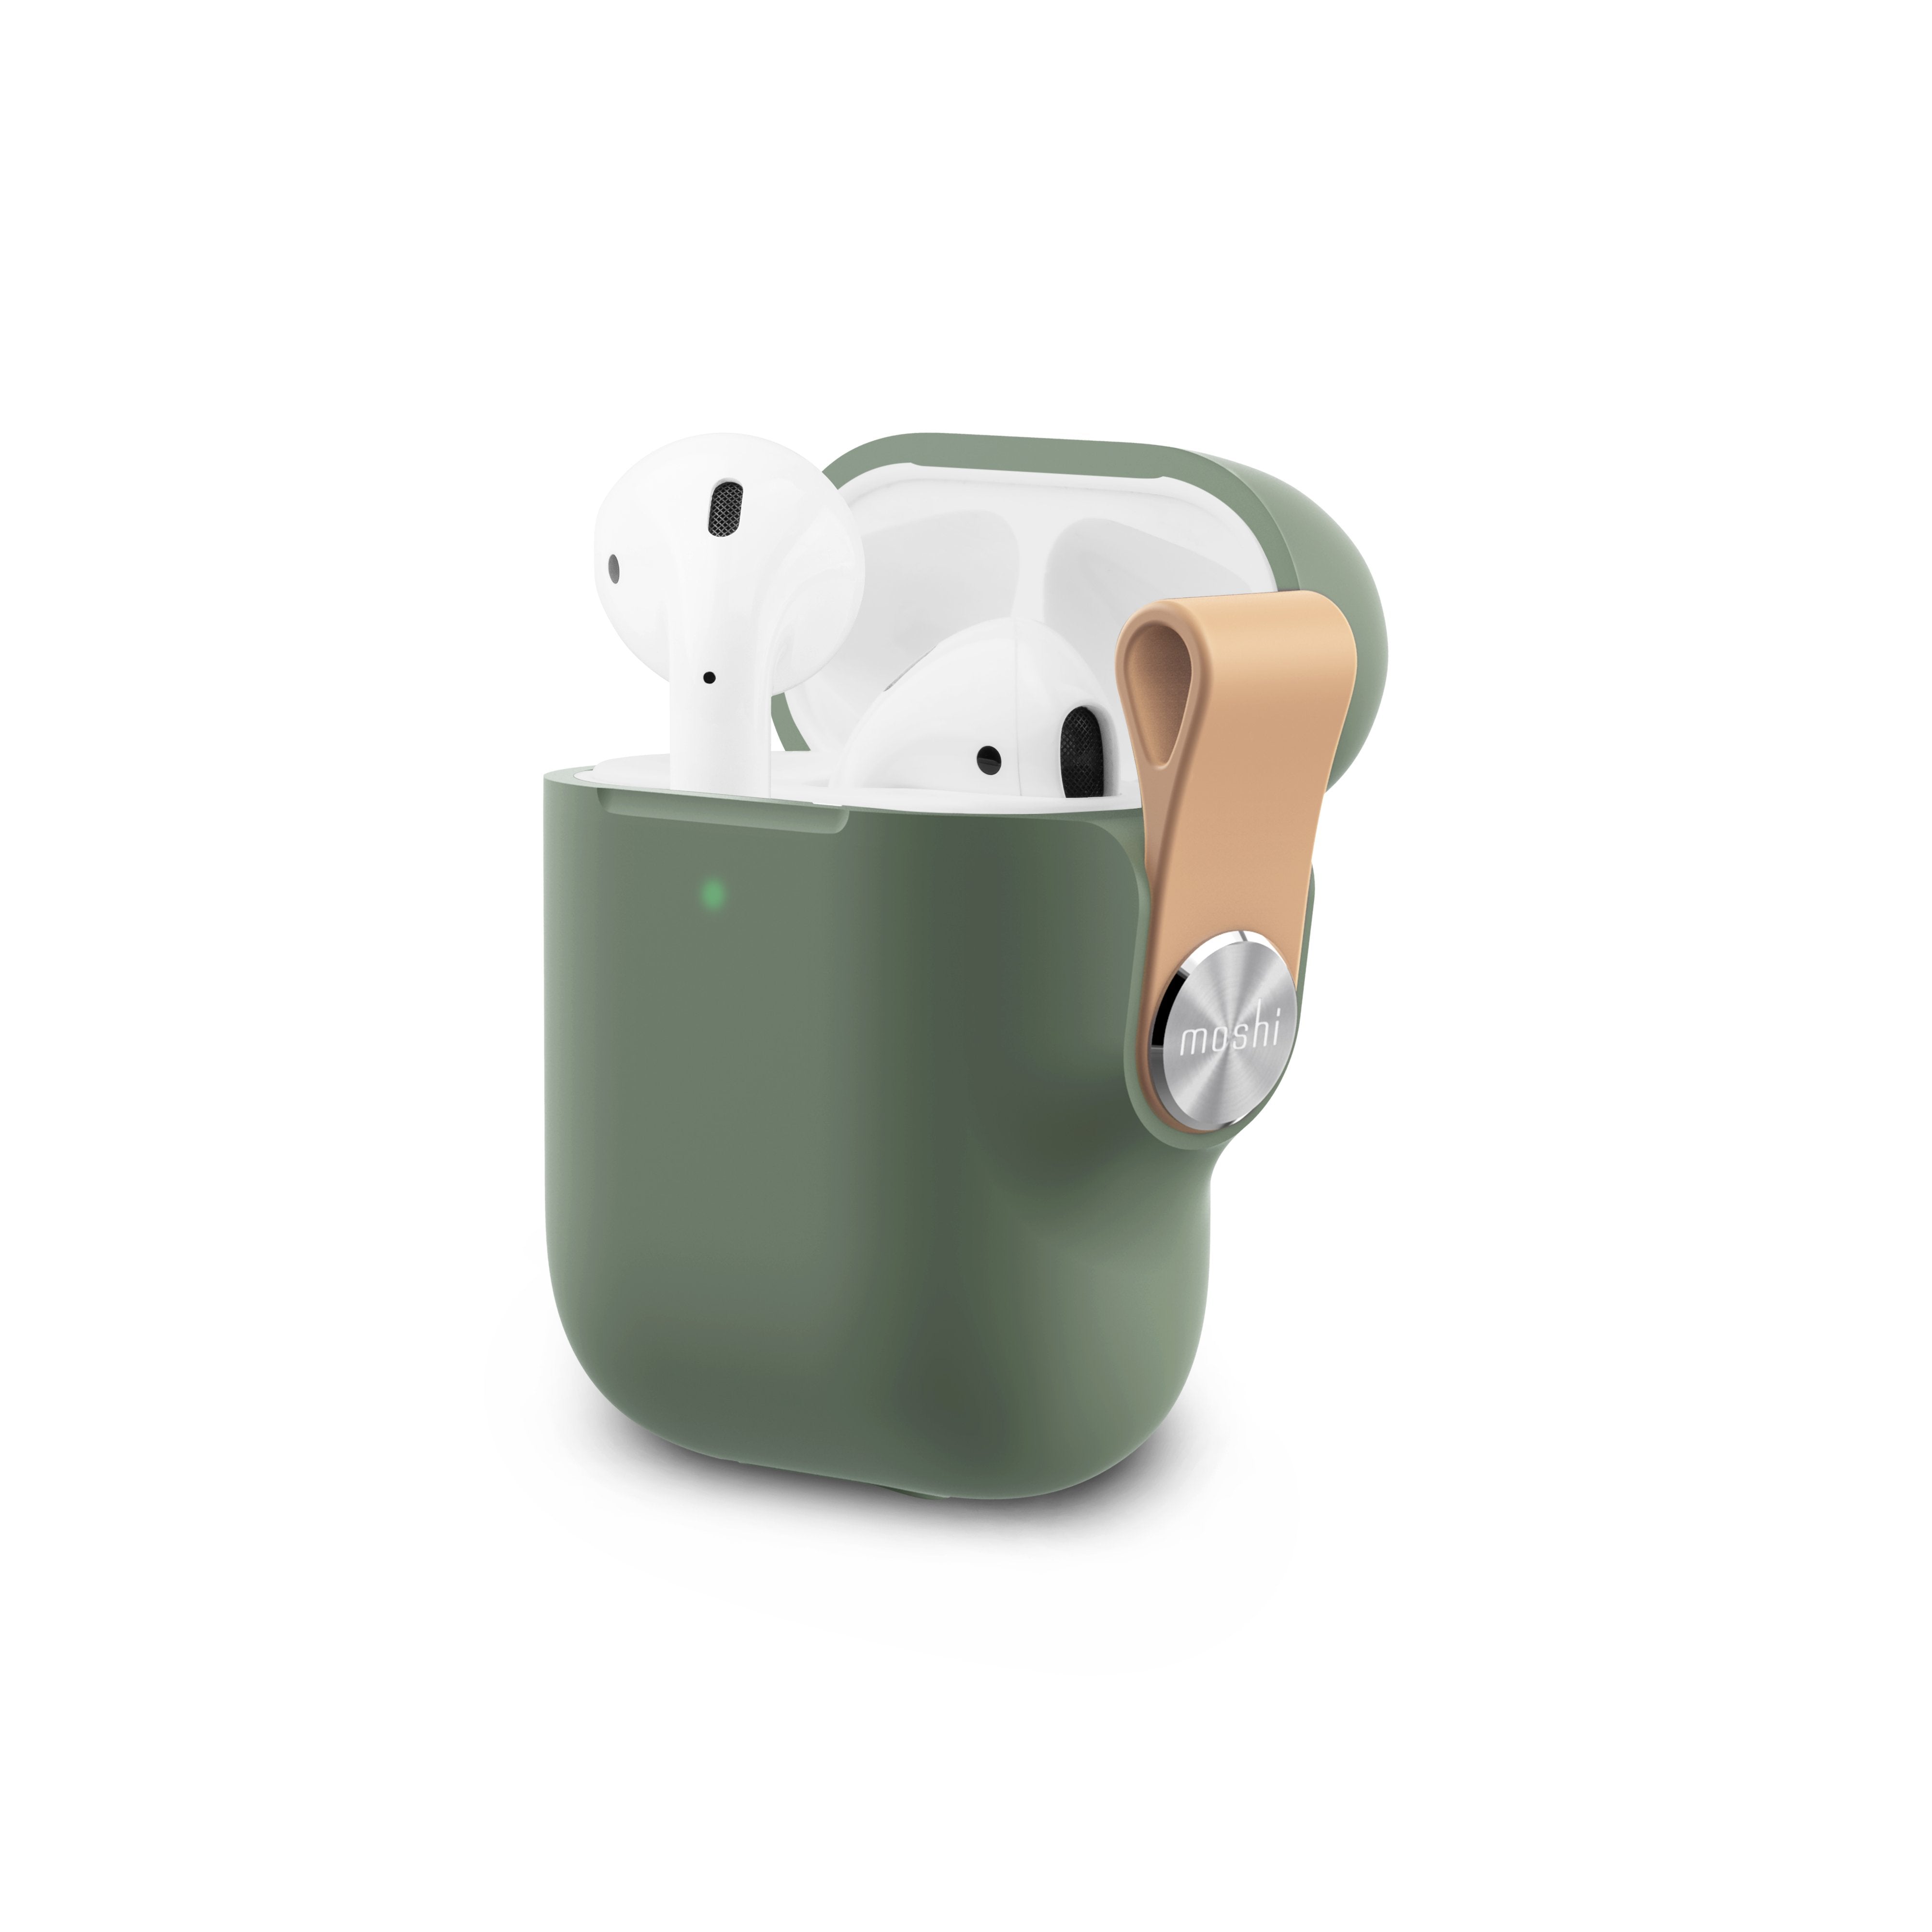 Moshi PEBBO AirPods Gen 1/2 Case - Shock Absorb Stylish AirPods Cover w/ Detachable Wrist Strap Included & LintGuard Protection, Wireless Charging Compatible, w/ LED indicator- Mint Green